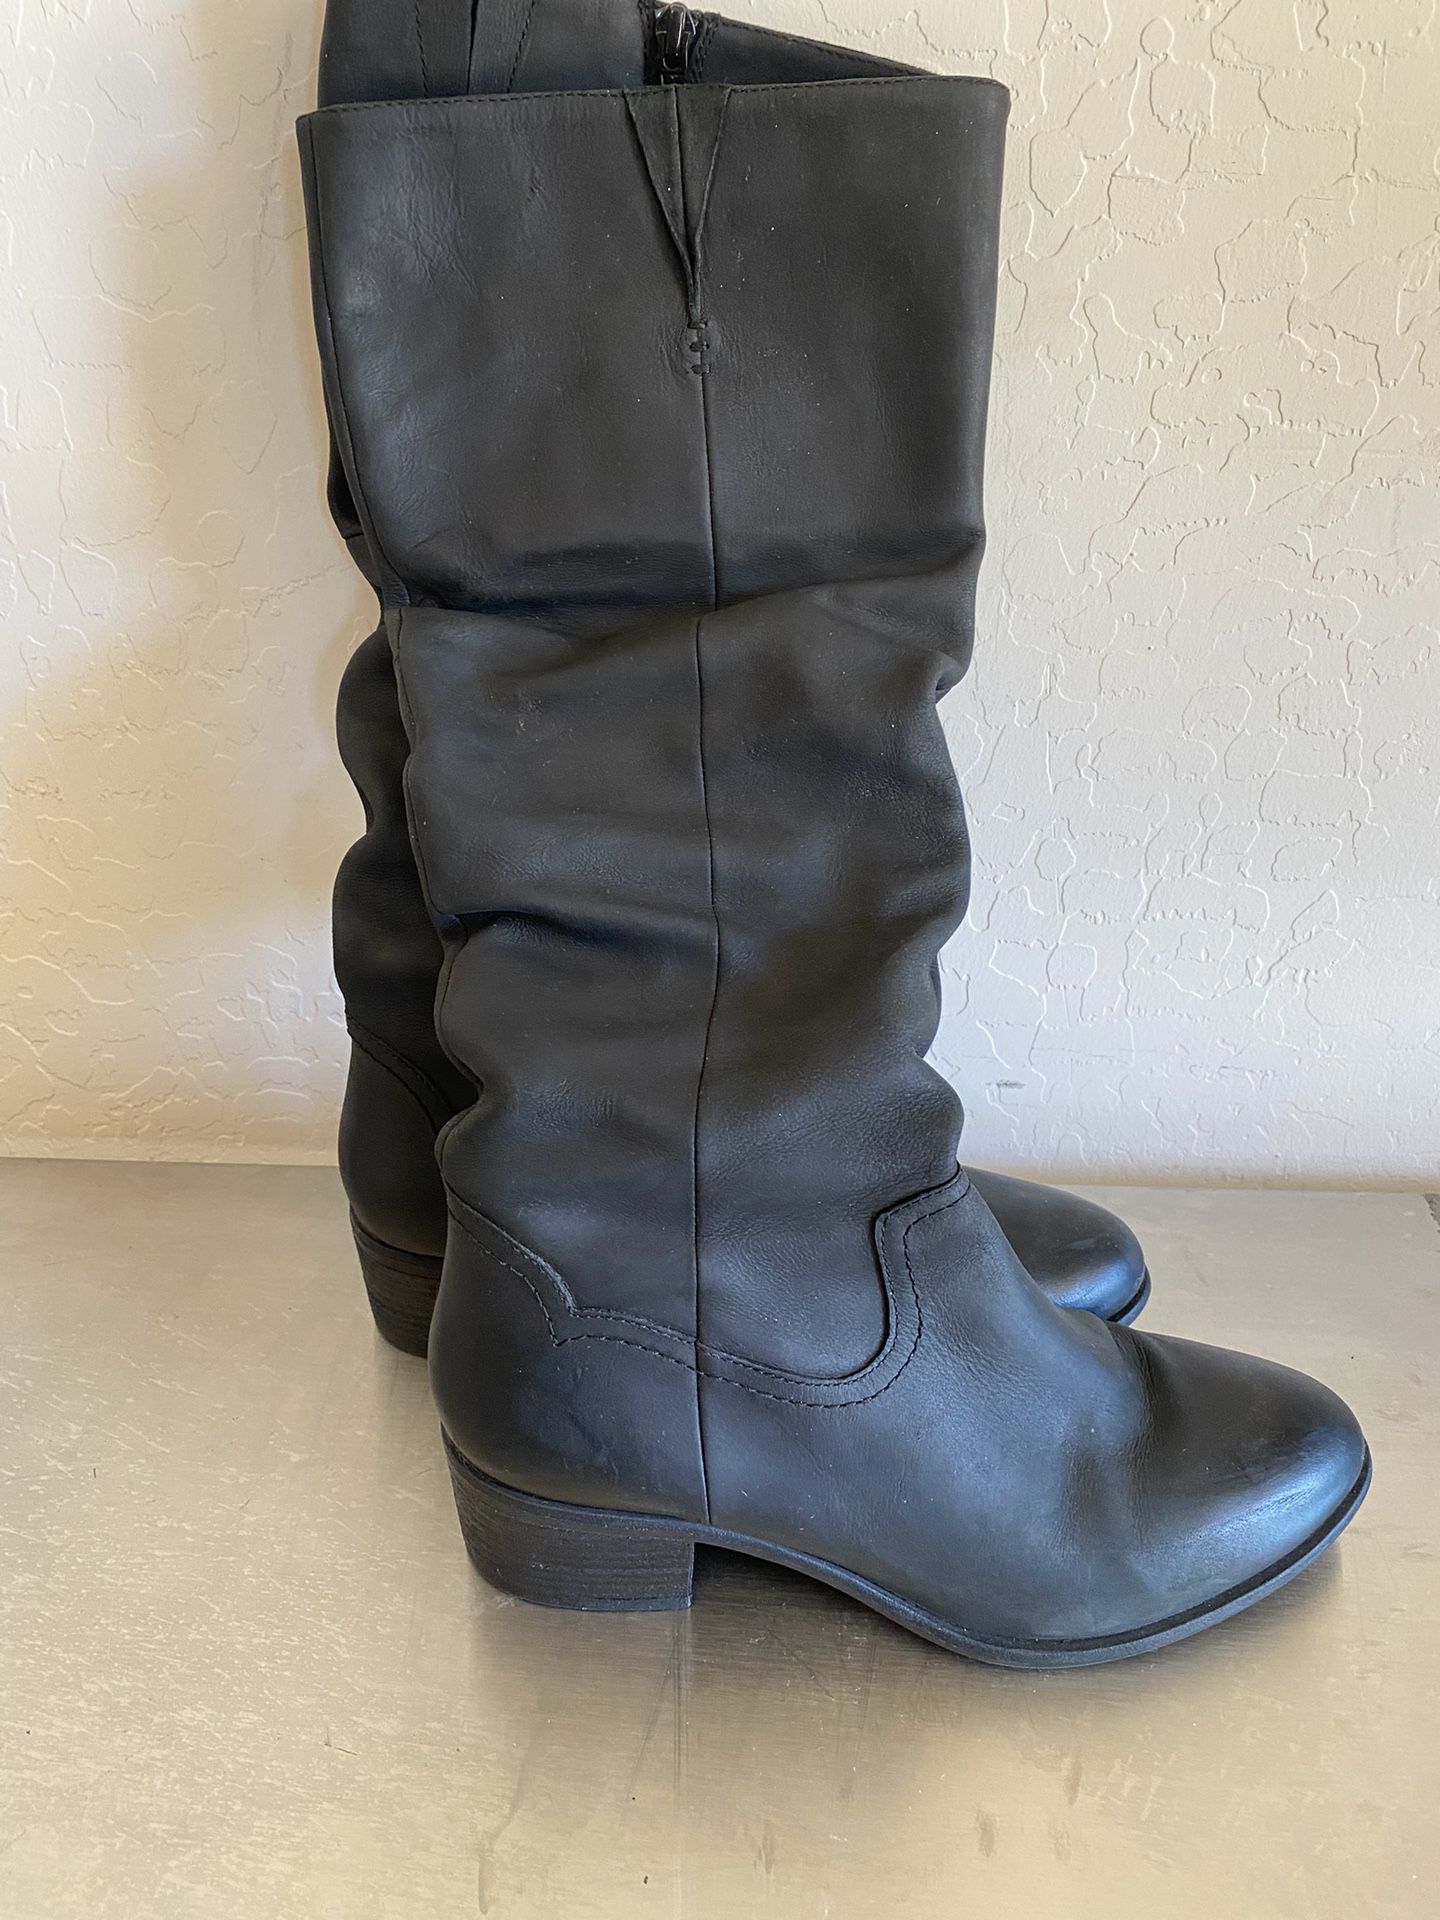 Steve Madden Murray Leather Black Riding Boots